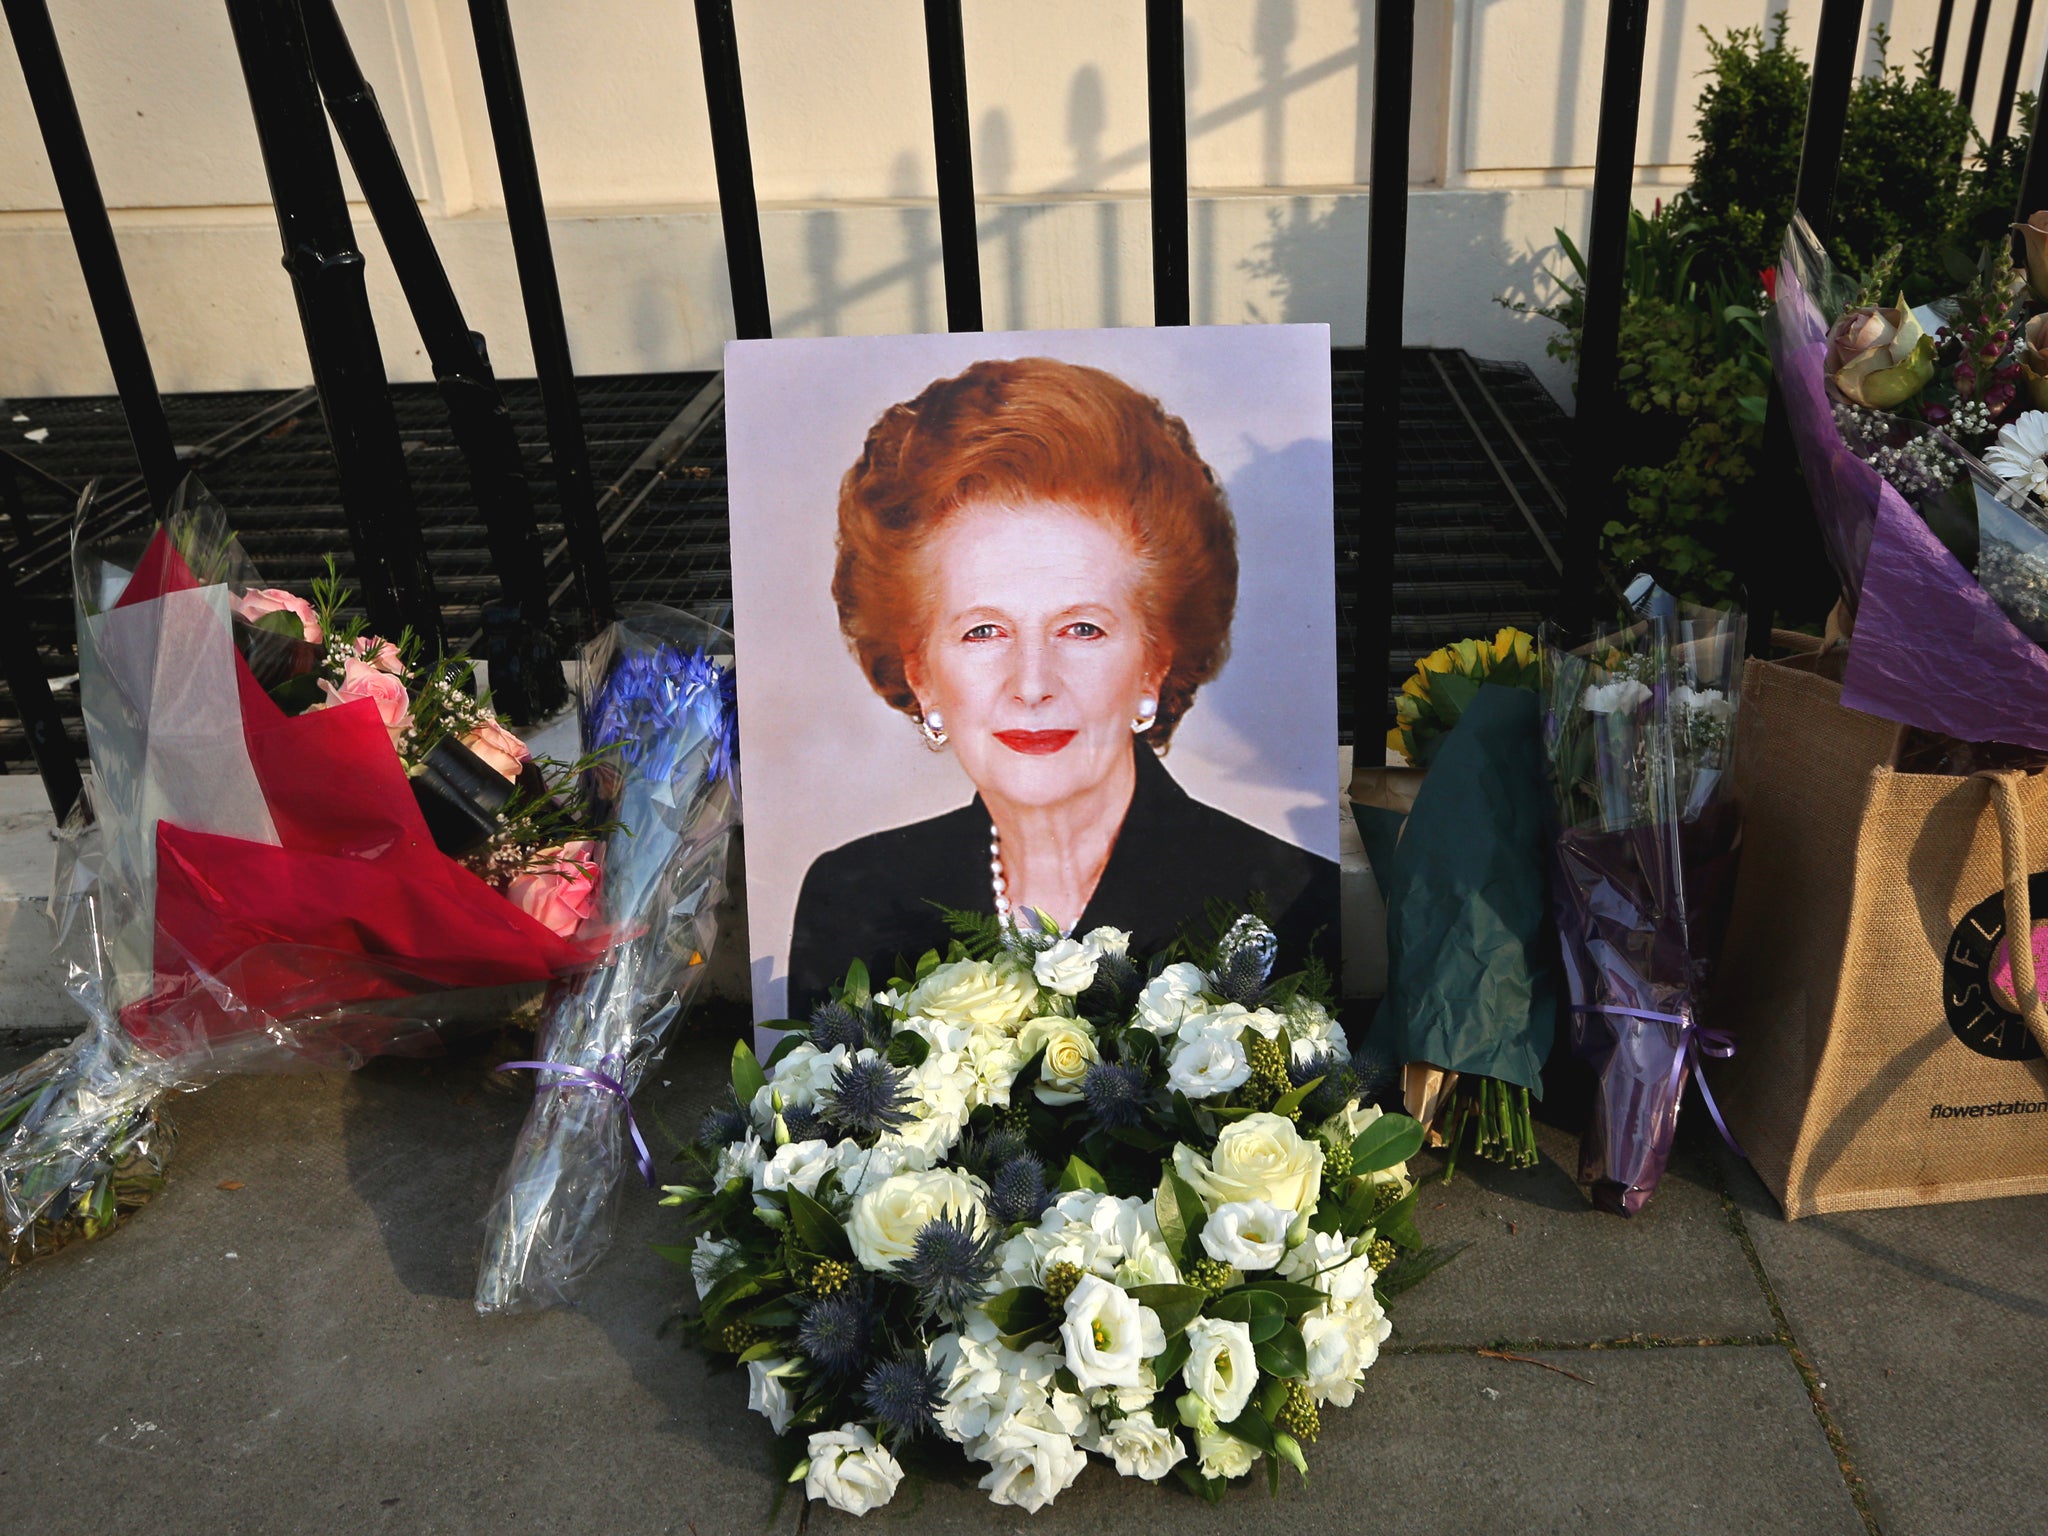 A portrait of former Prime Minister Margaret Thatcher is left next to floral tributes outside her residence